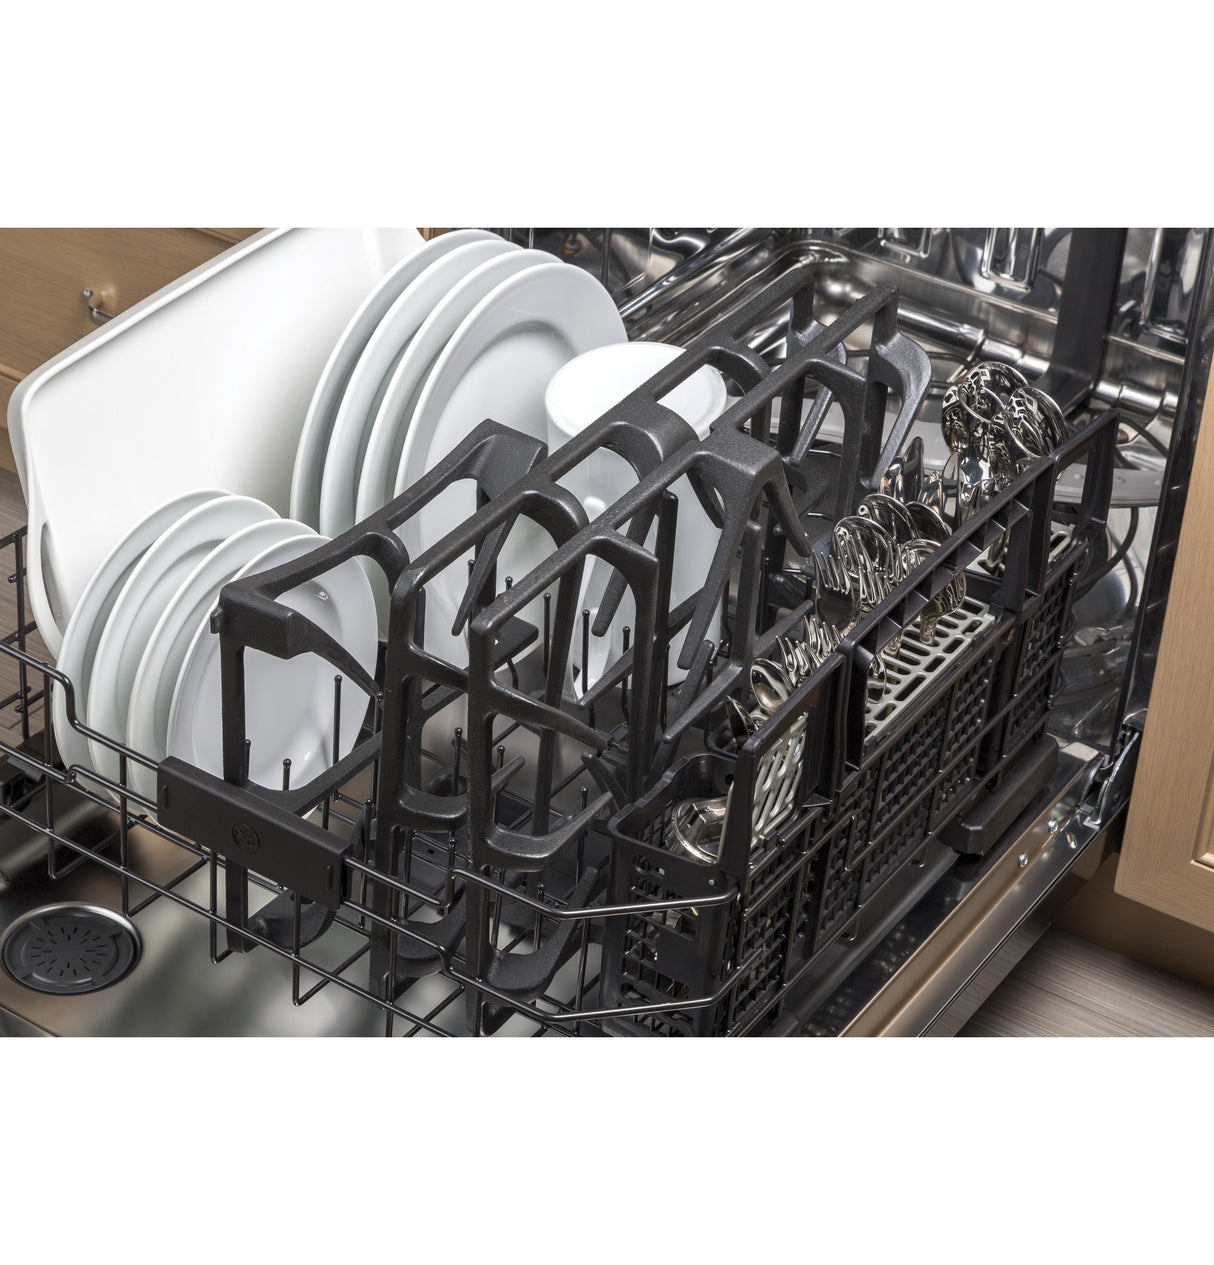 GE(R) 36" Built-In Gas Cooktop with 5 Burners and Dishwasher Safe Grates - (JGP5036DLBB)